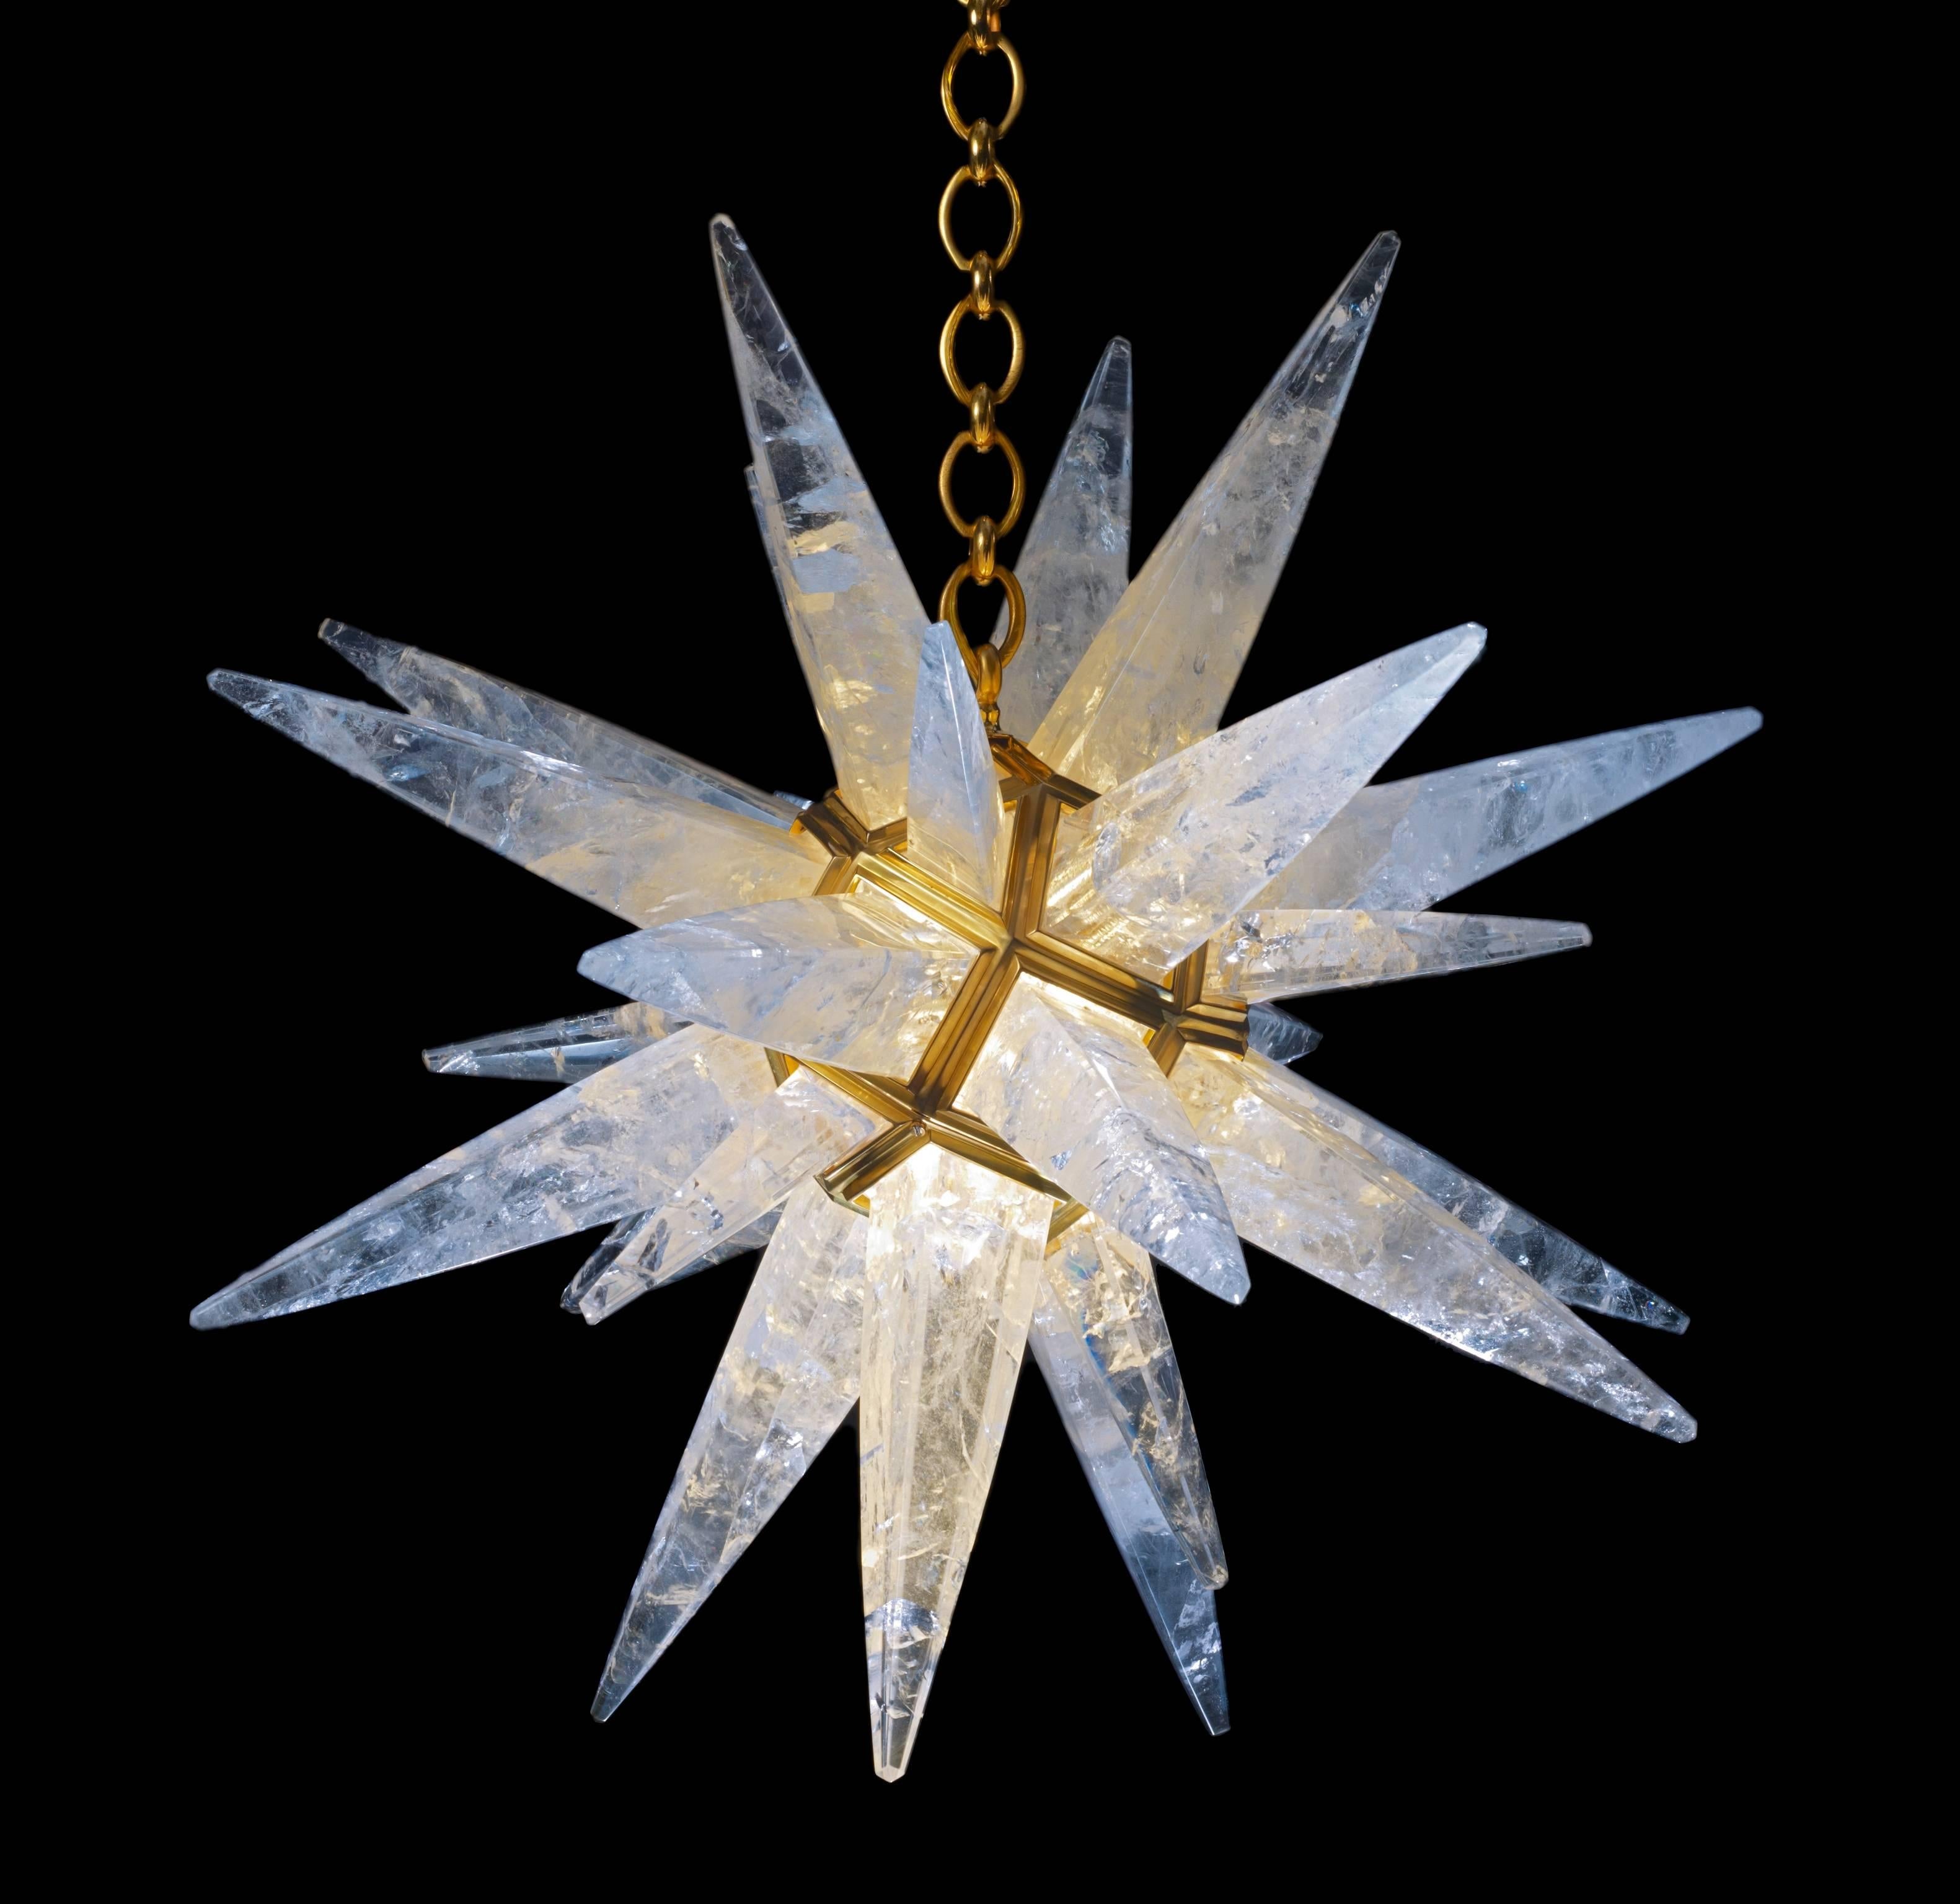 Rock crystal quartz star light gold edition.
Since 2011 Alexandre Vossion was the first who made this model only in rock crystal after an Art Deco model. (Which is made only in glass).
This rock crystal star lighting is made in France.
The fixture,